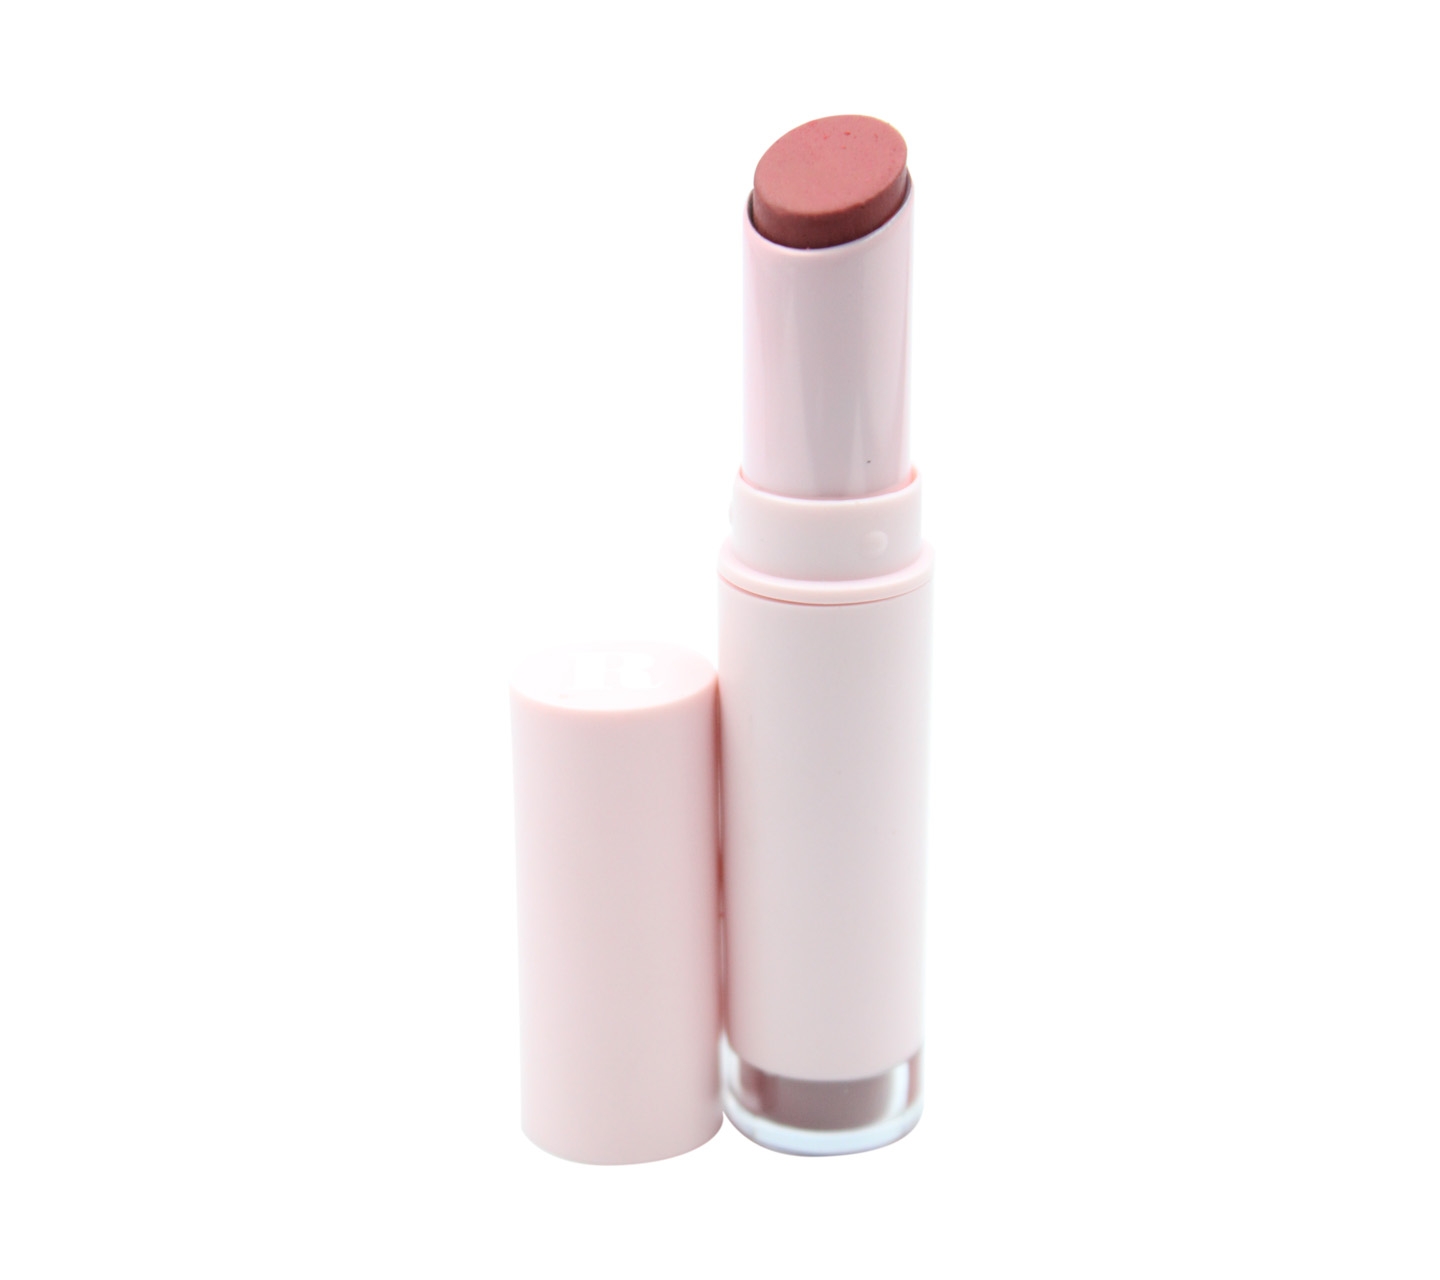 Rose All Day Lip And Cheek Pop Lipstick